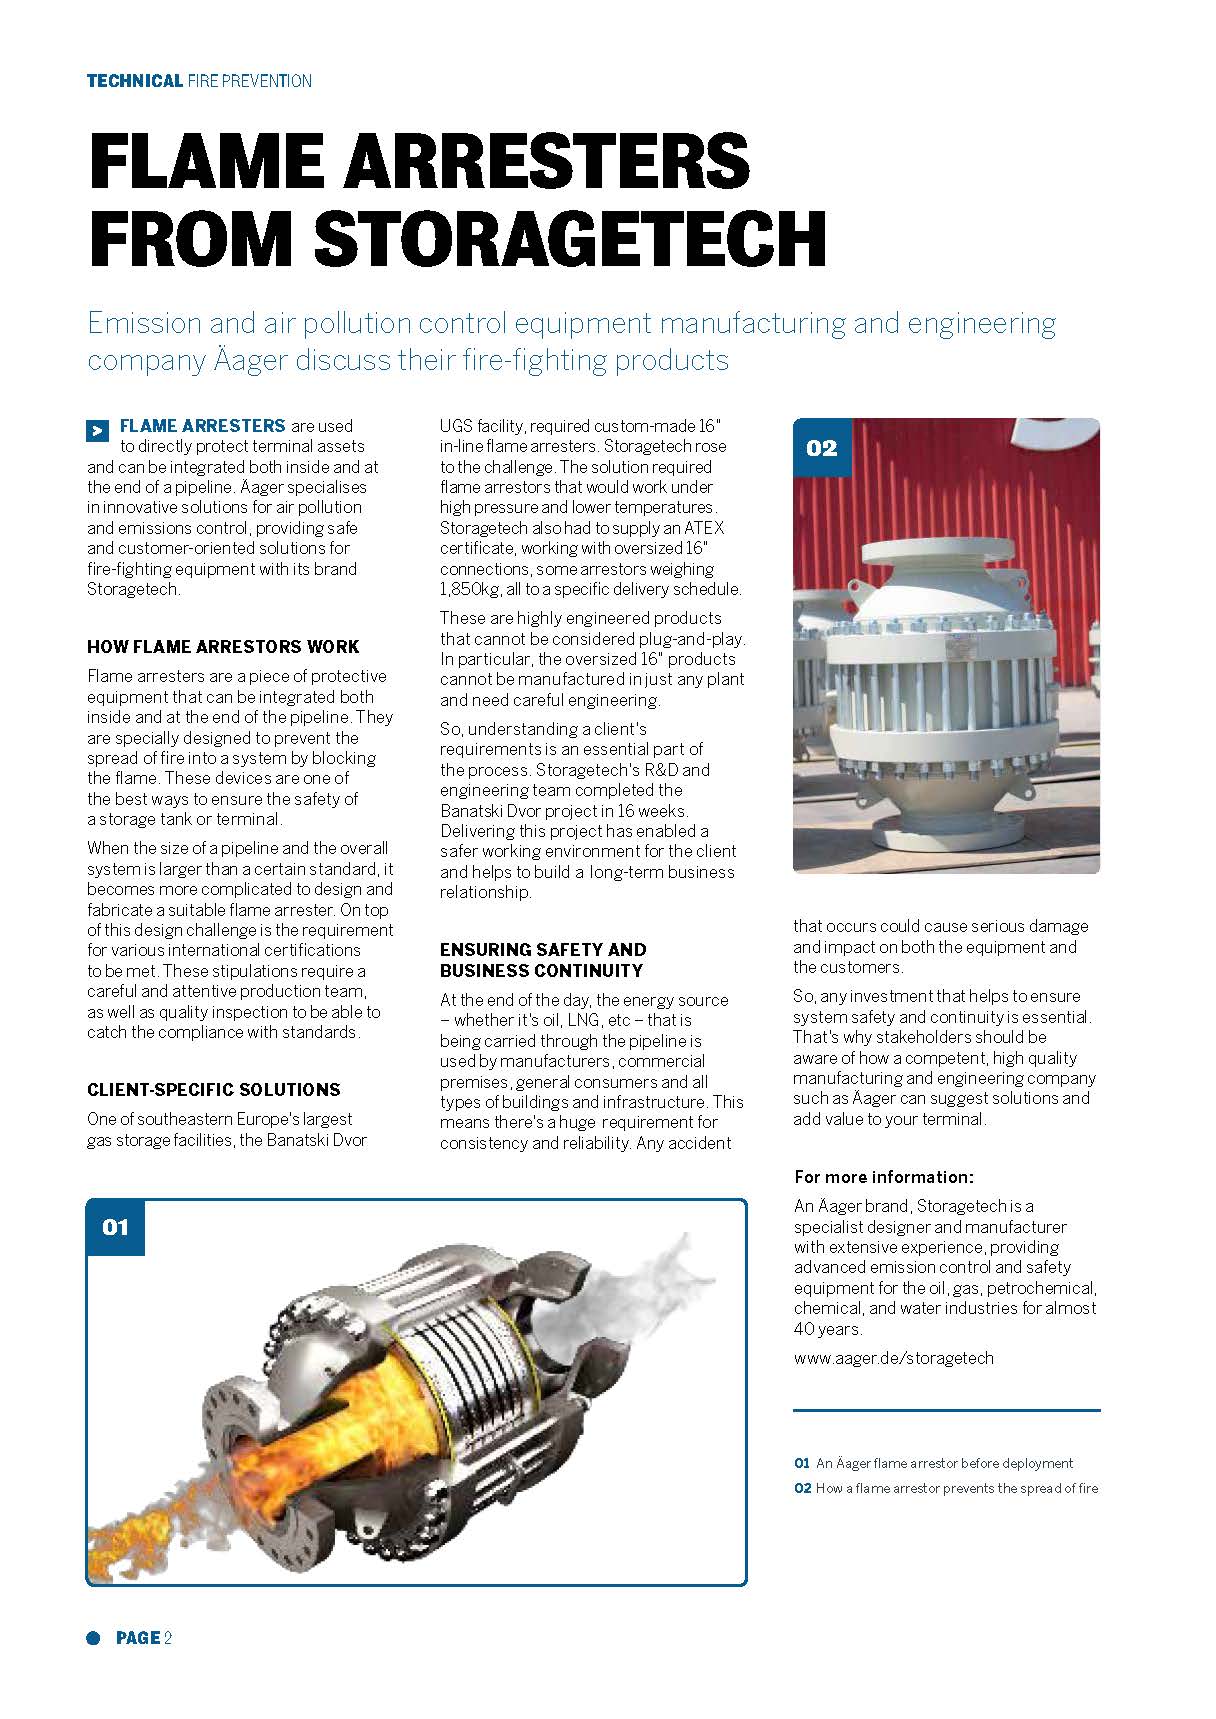 Customer-Oriented Flame Arresters from Storagetech – Tank Storage Magazine Article 19